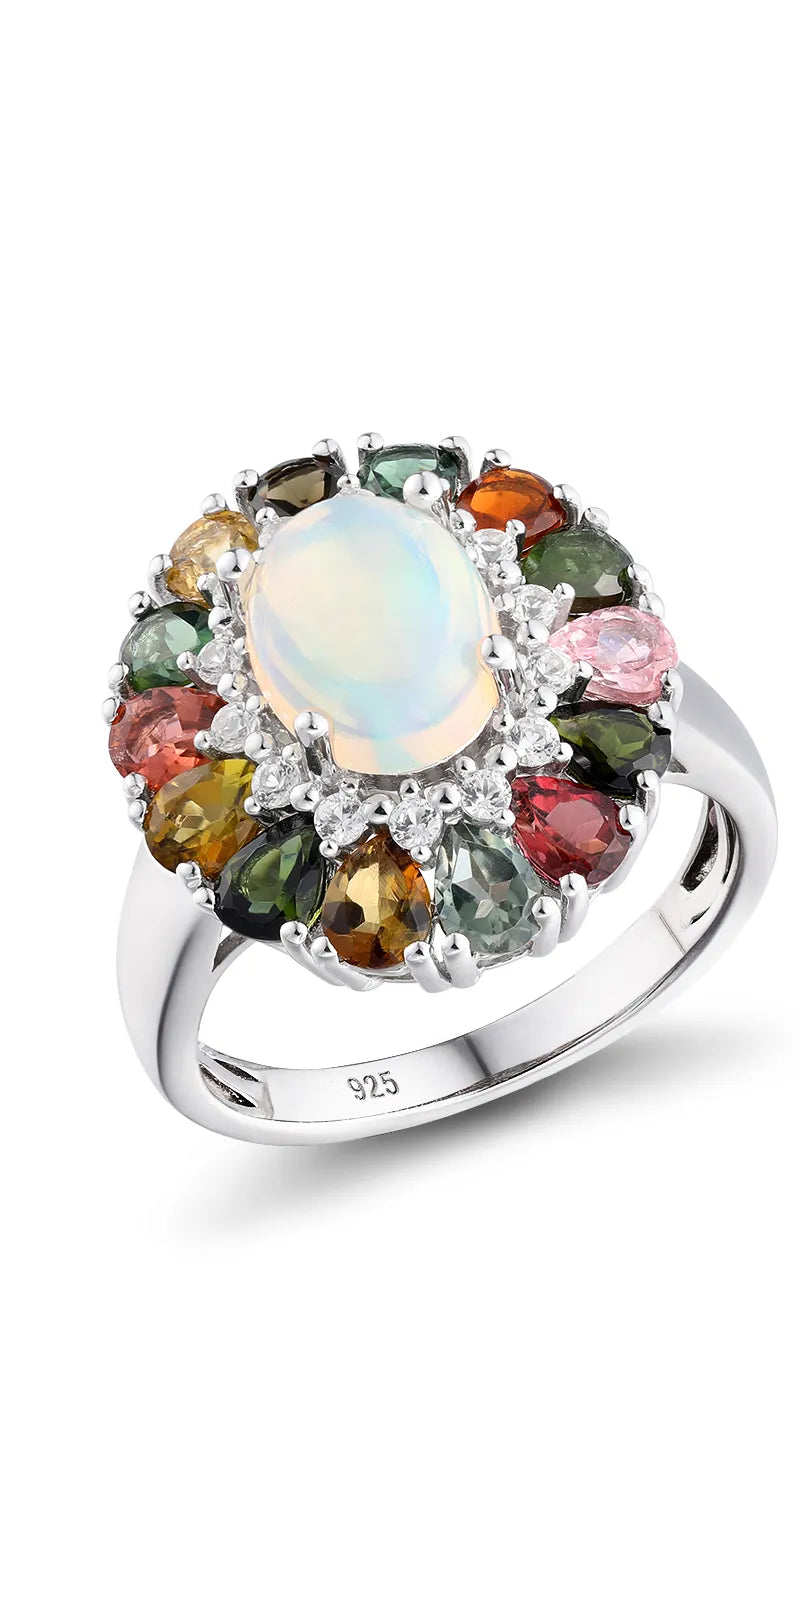 Flower Opal and Tourmaline 925 Sterling Silver RingRing5